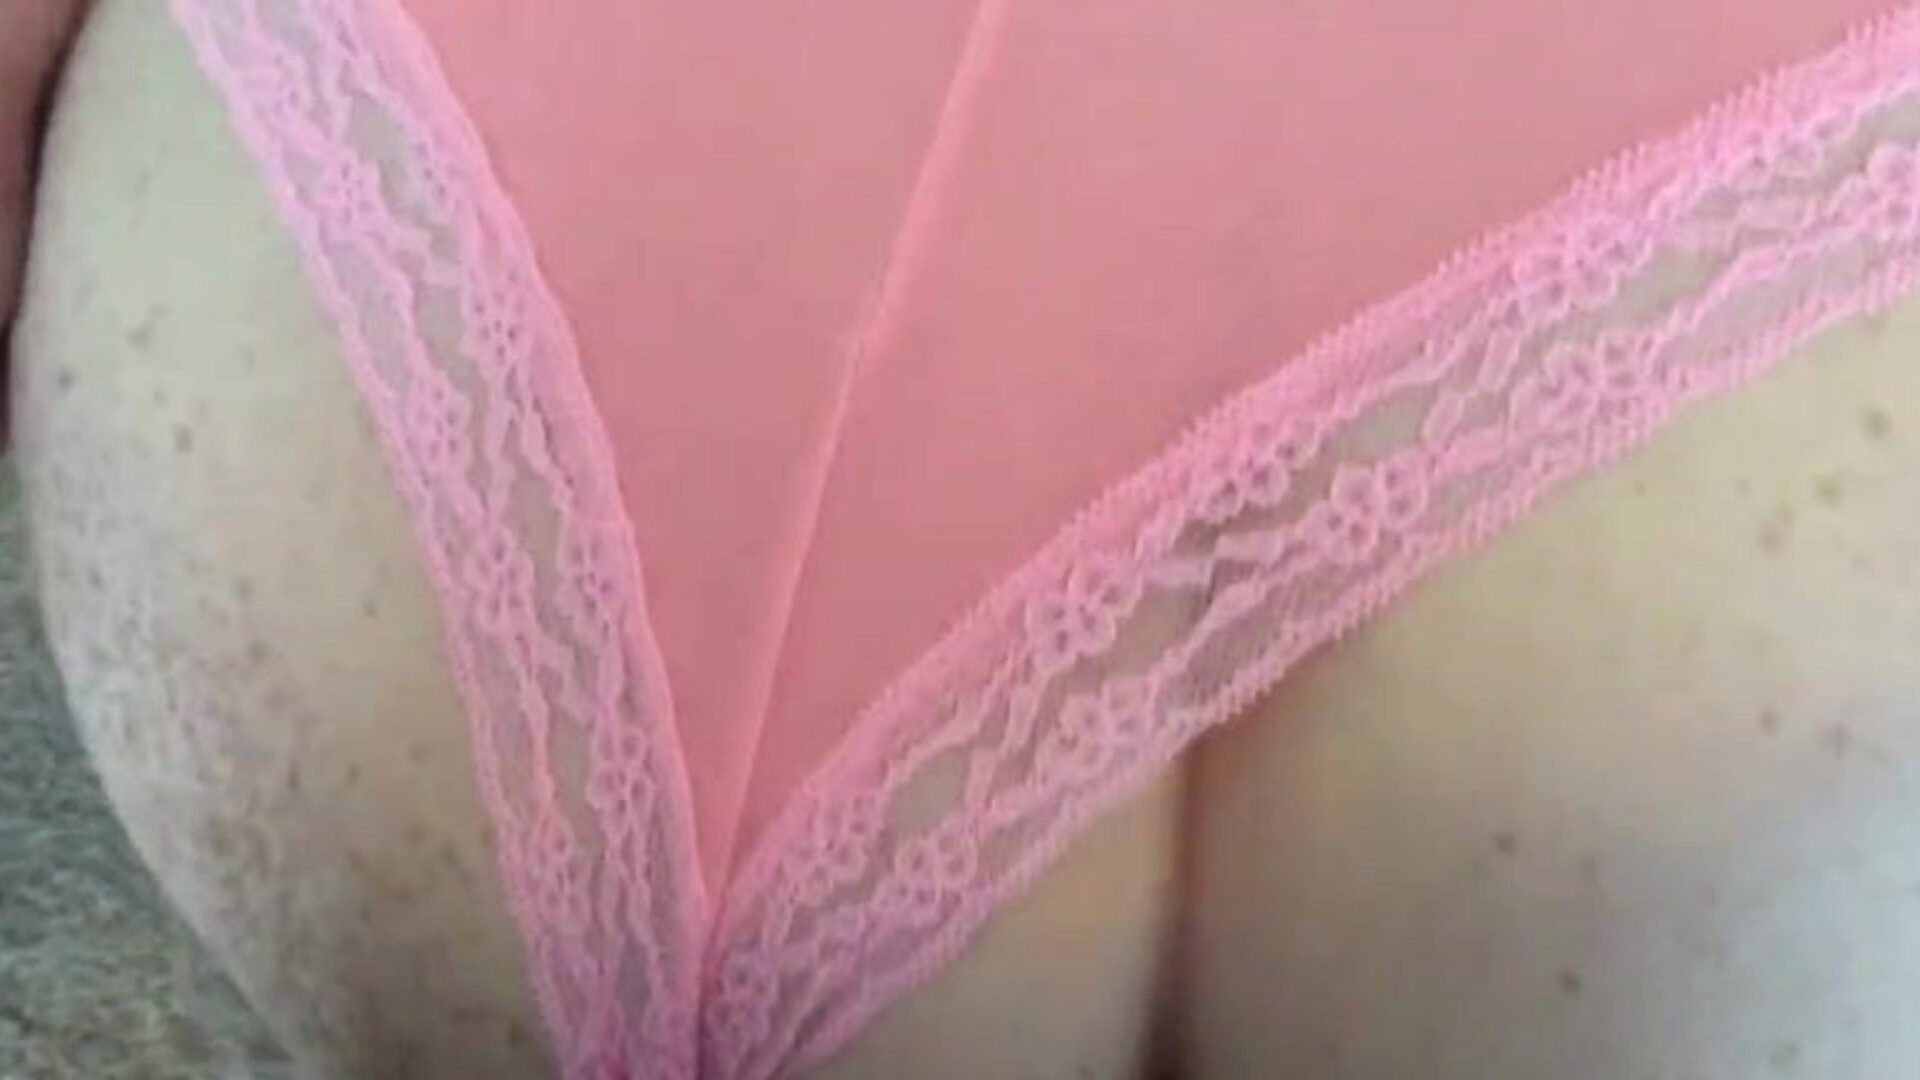 Banging in rosy pants and accidental facial